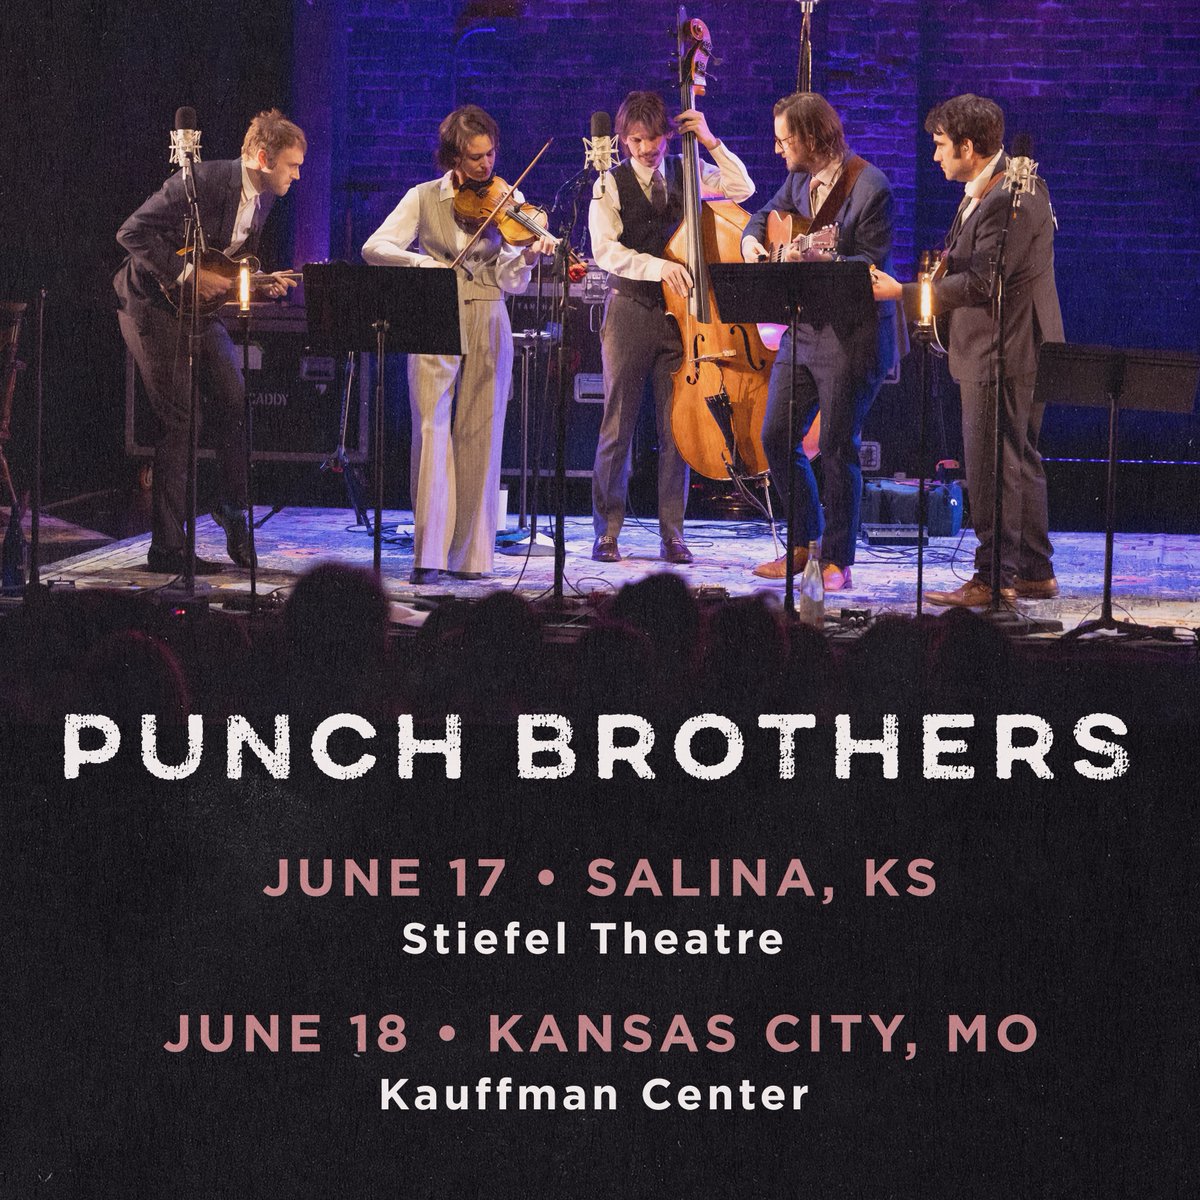 Punch Brothers will play two shows on the road to Telluride Bluegrass Festival — Salina, KS and Kansas City, MO. Limited pre-sale tickets go on sale tomorrow at 10a CT. Sign up to receive the code at punchbrothers.com. General on-sale begins this Friday. -PB HQ